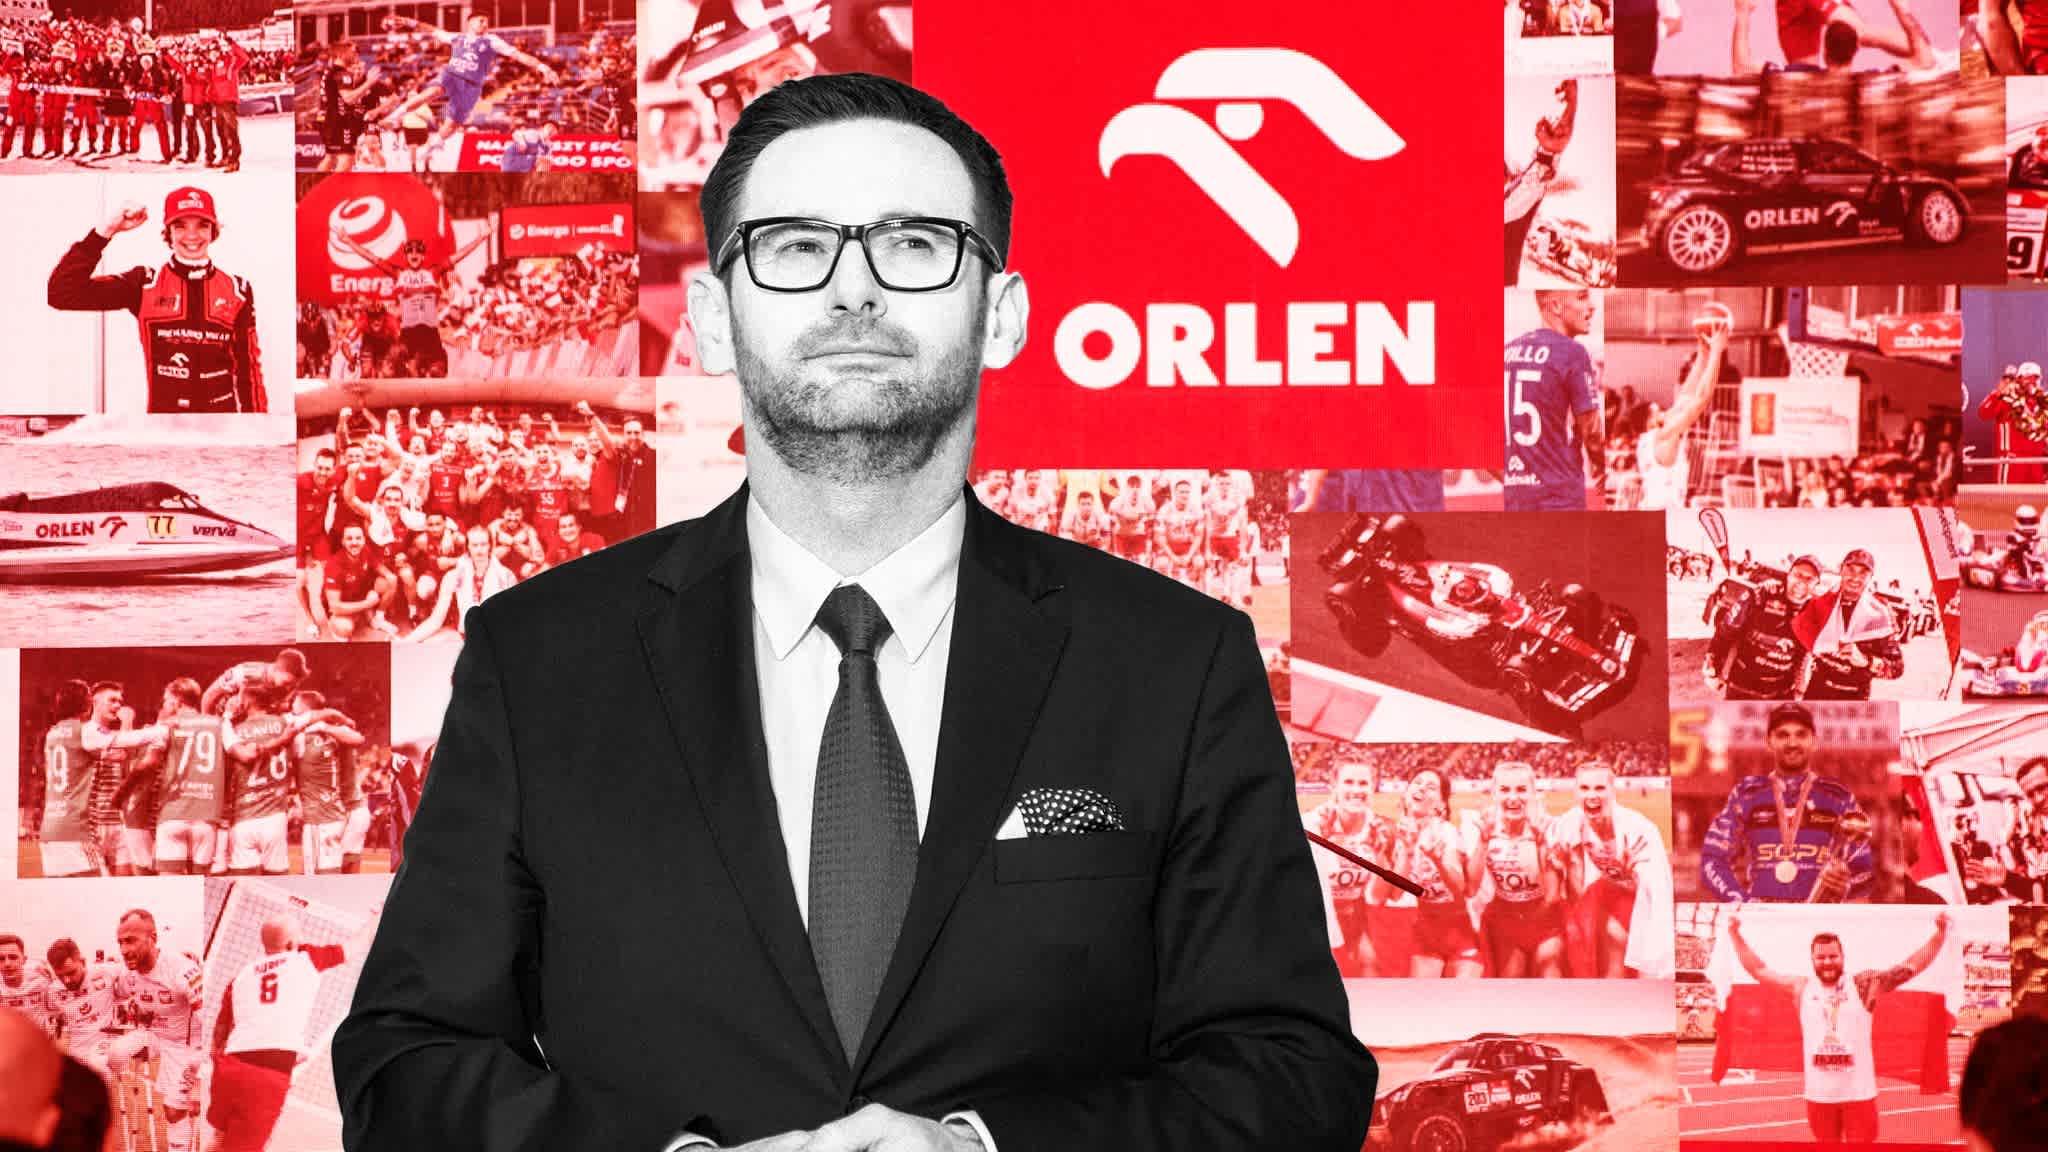 Orlen: is Poland’s energy giant a tool of the government?